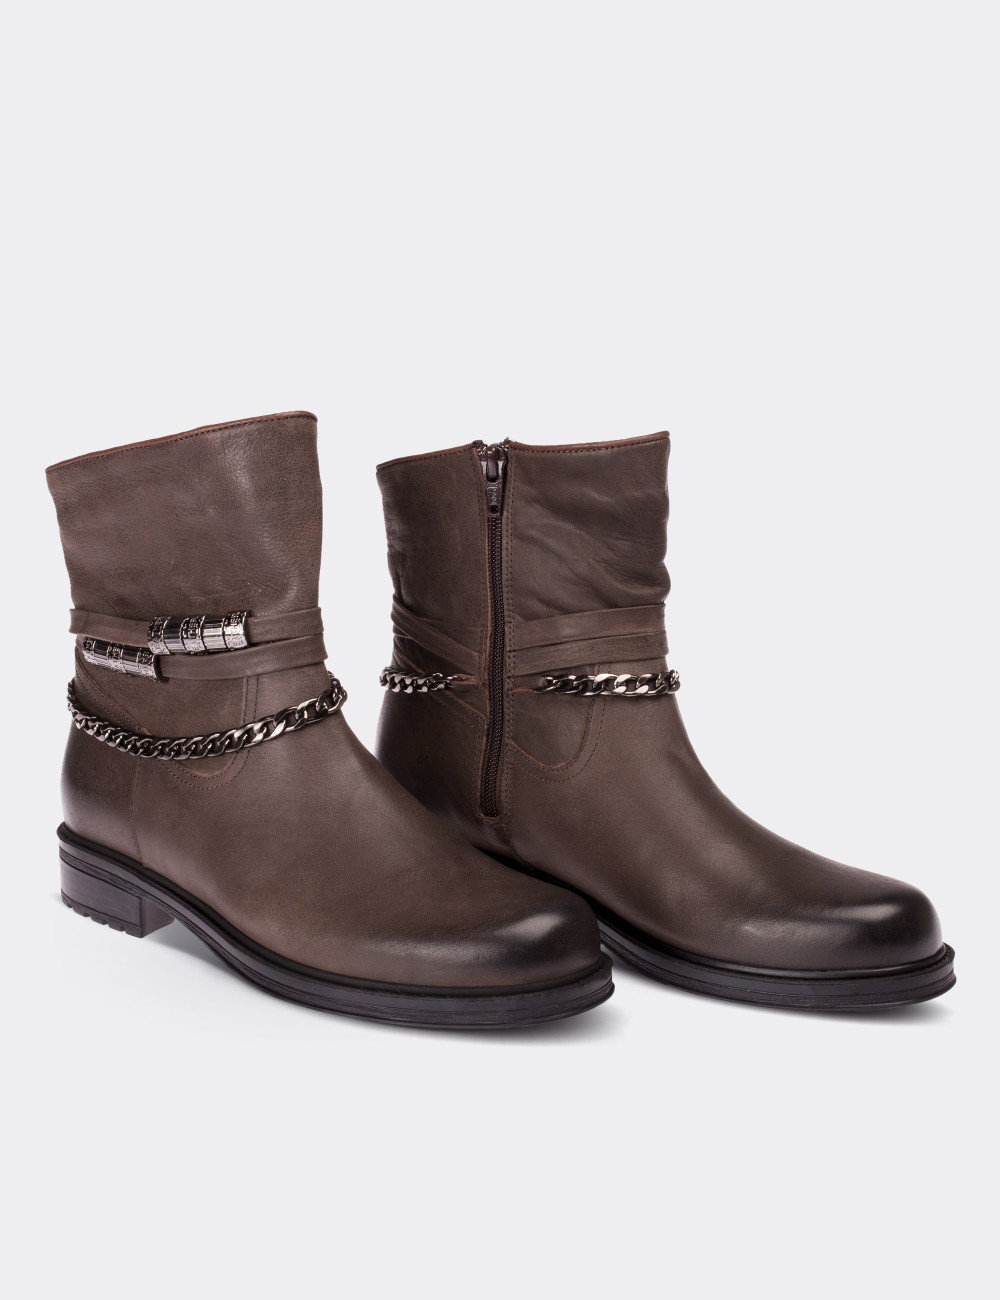 Brown Nubuck Leather Boots - 10321ZKHVC01